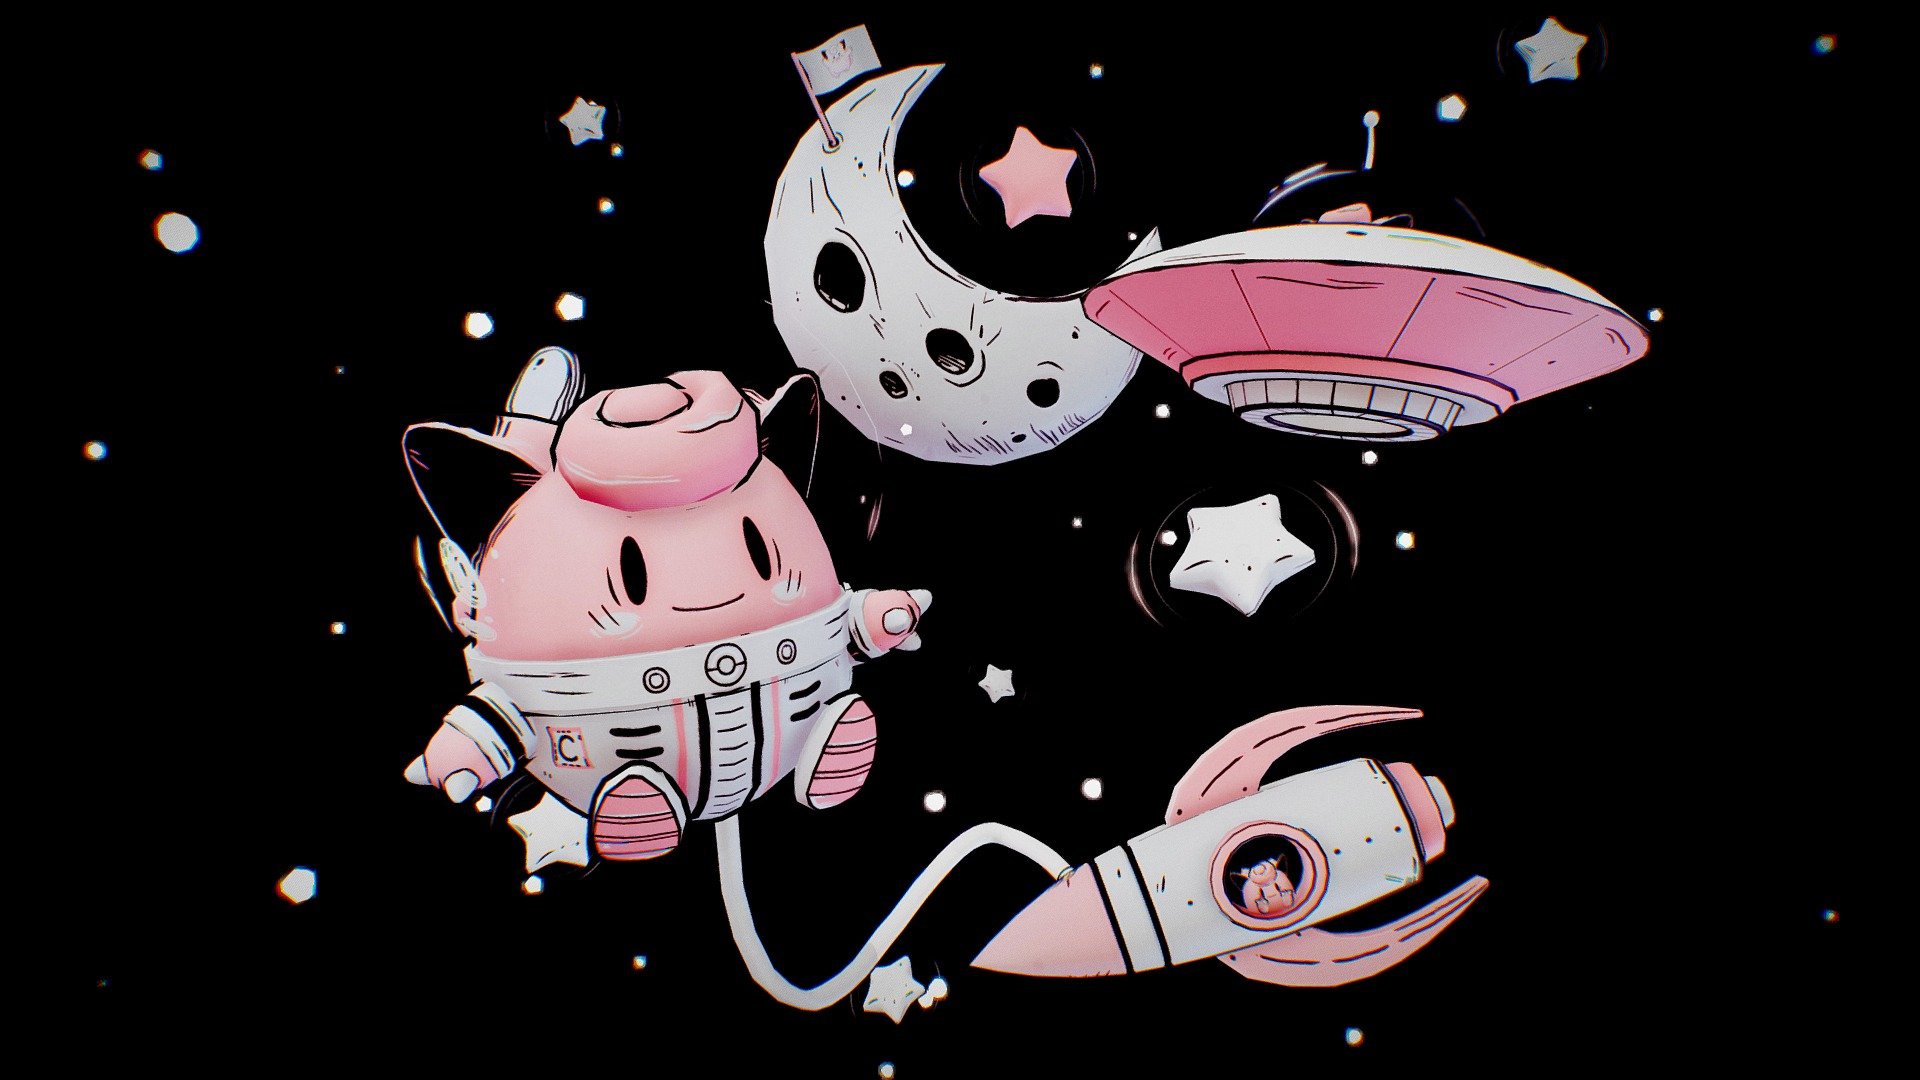 To the moon! 
I saw this illustration by Casey Uhelski (@miskiart) https://twitter.com/miskiart a while back, fell in love with it and I really wanted to create a 3D rendition. I hope you guys like it - Clefairy (Illustration by Casey Uhelski) - 3D model by Andy (Pandabox) (@ItsPandaBox) 3d model